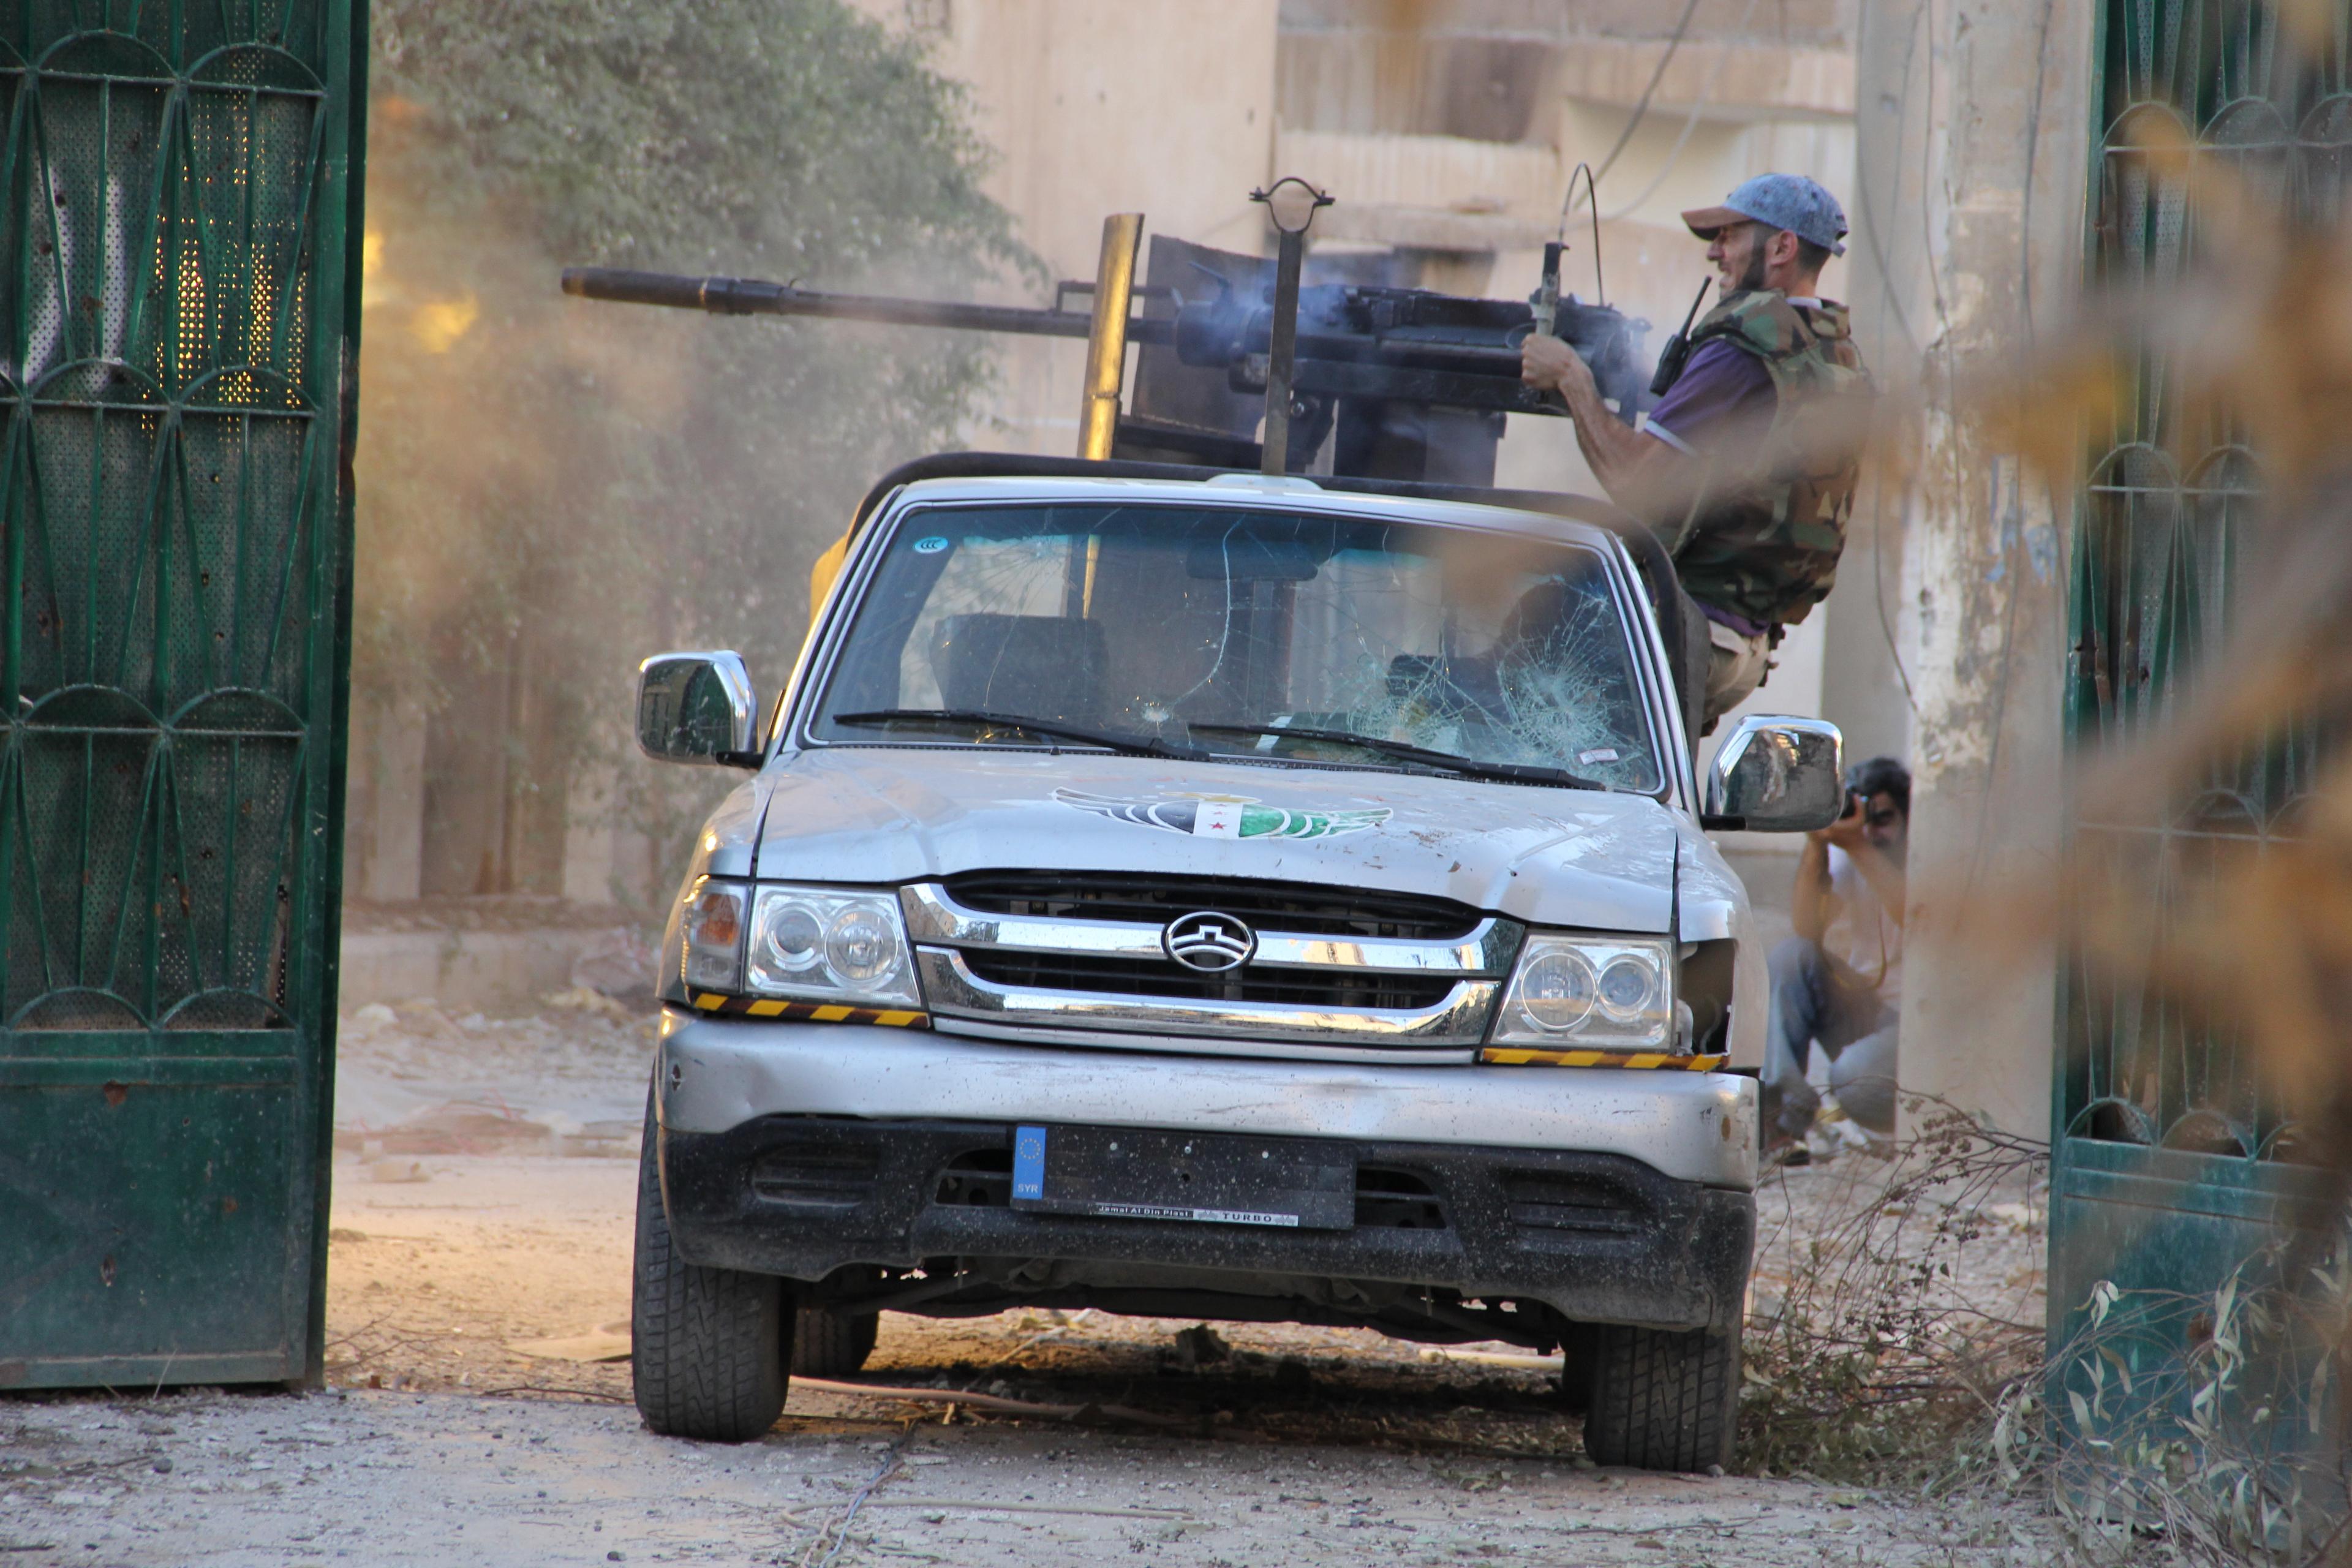 Free Syrian Army fighter attacks a checkpoint for the Syrian regime in Almowathafeen neighborhood in DeirEzzor.